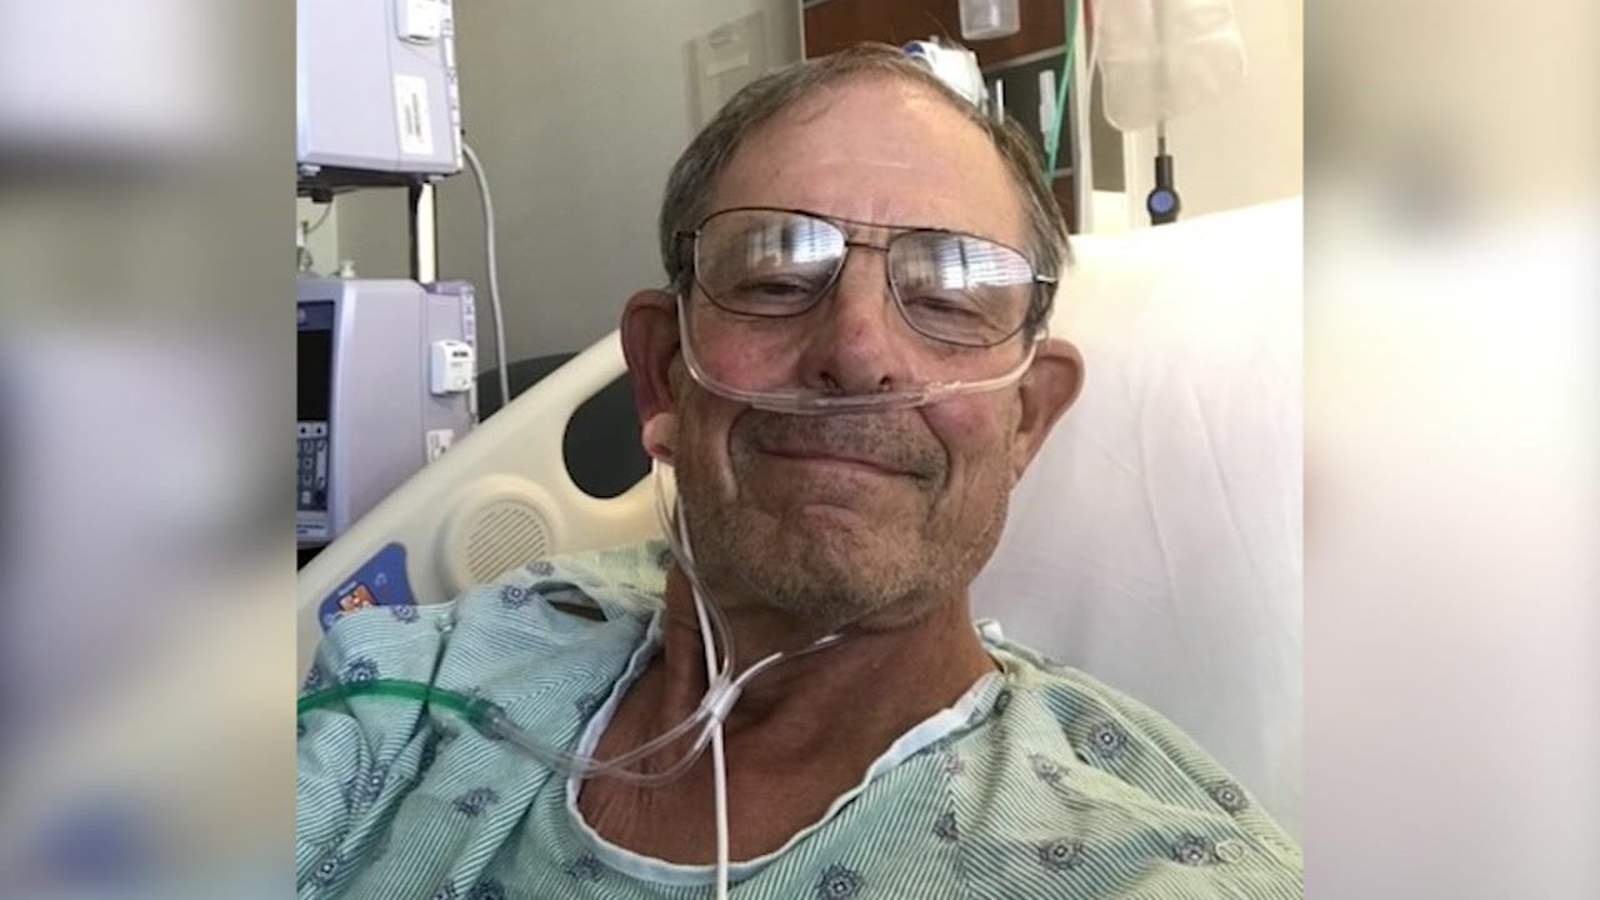 ‘He’s a survival story of COVID’: Retired Air Force general on the road to recovery